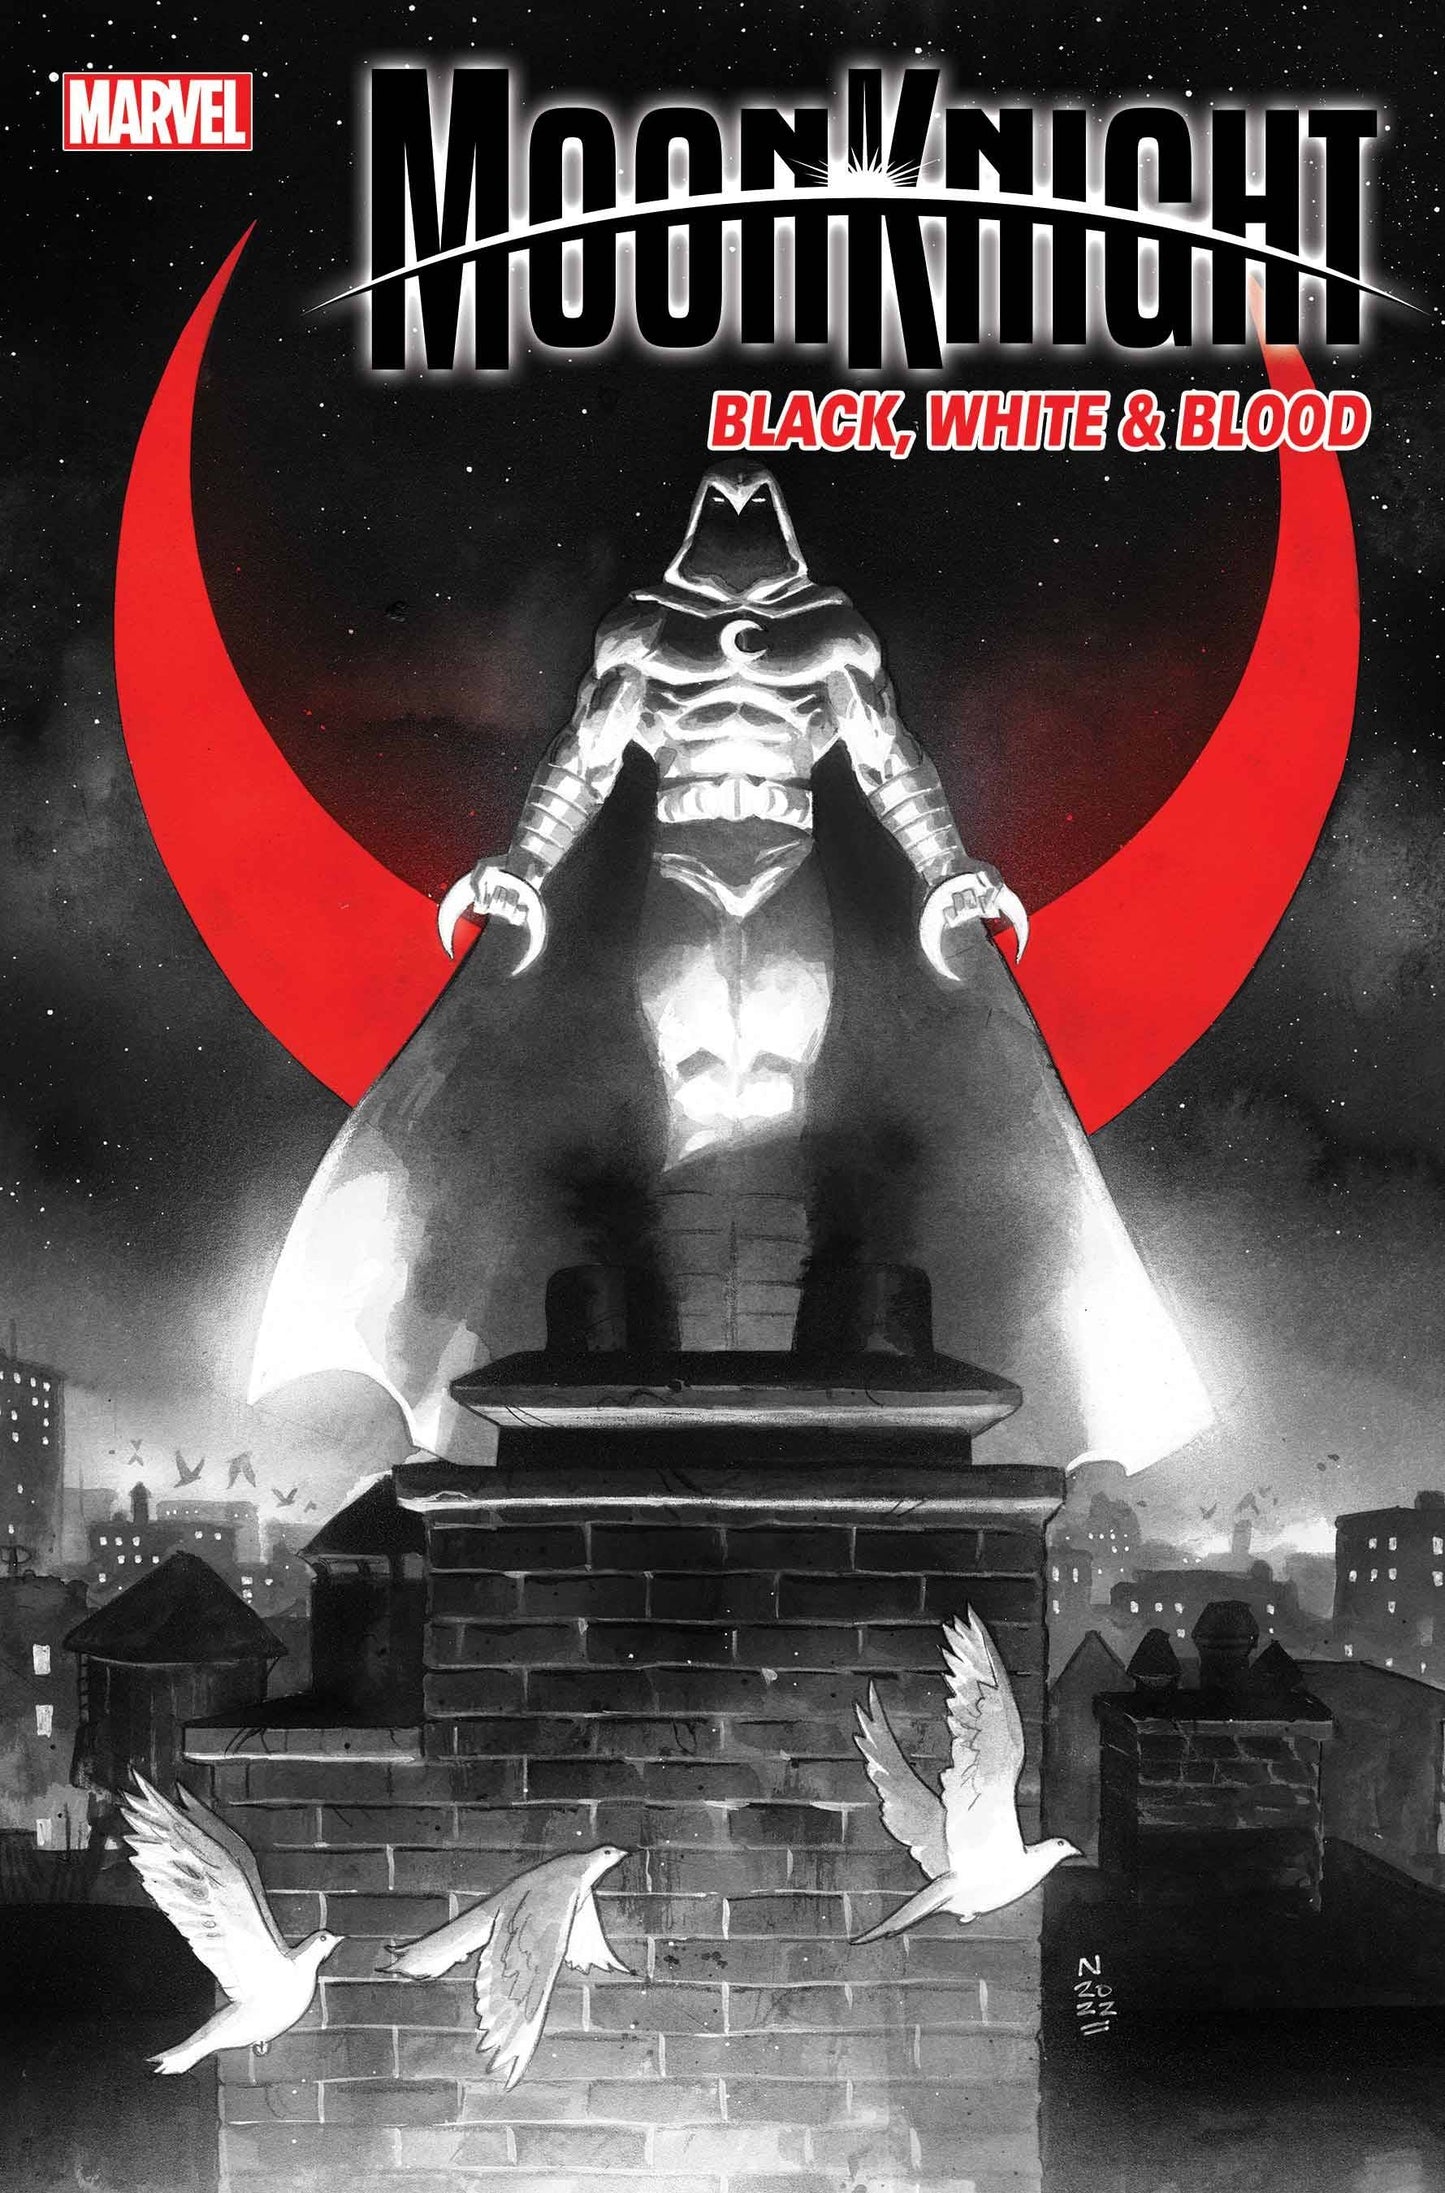 MOON KNIGHT BLACK WHITE BLOOD #3 (OF 4)